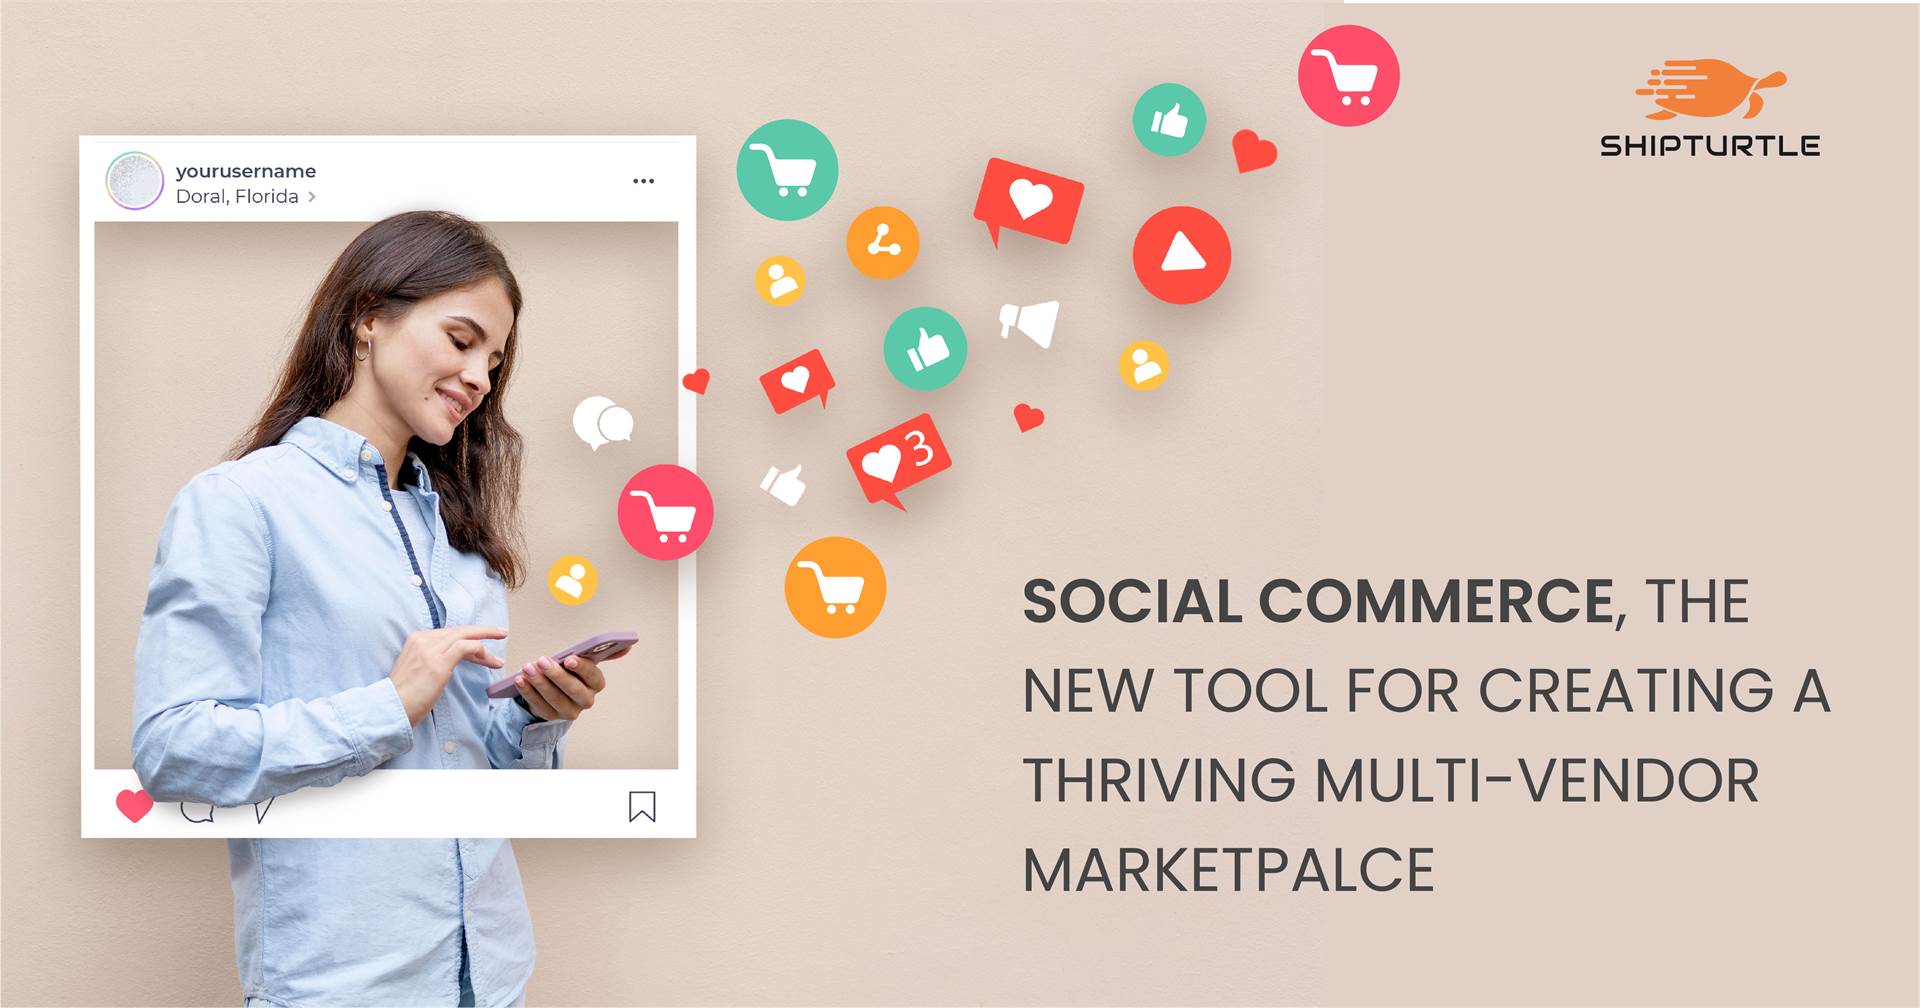 social commerce for online marketplace on shopifty